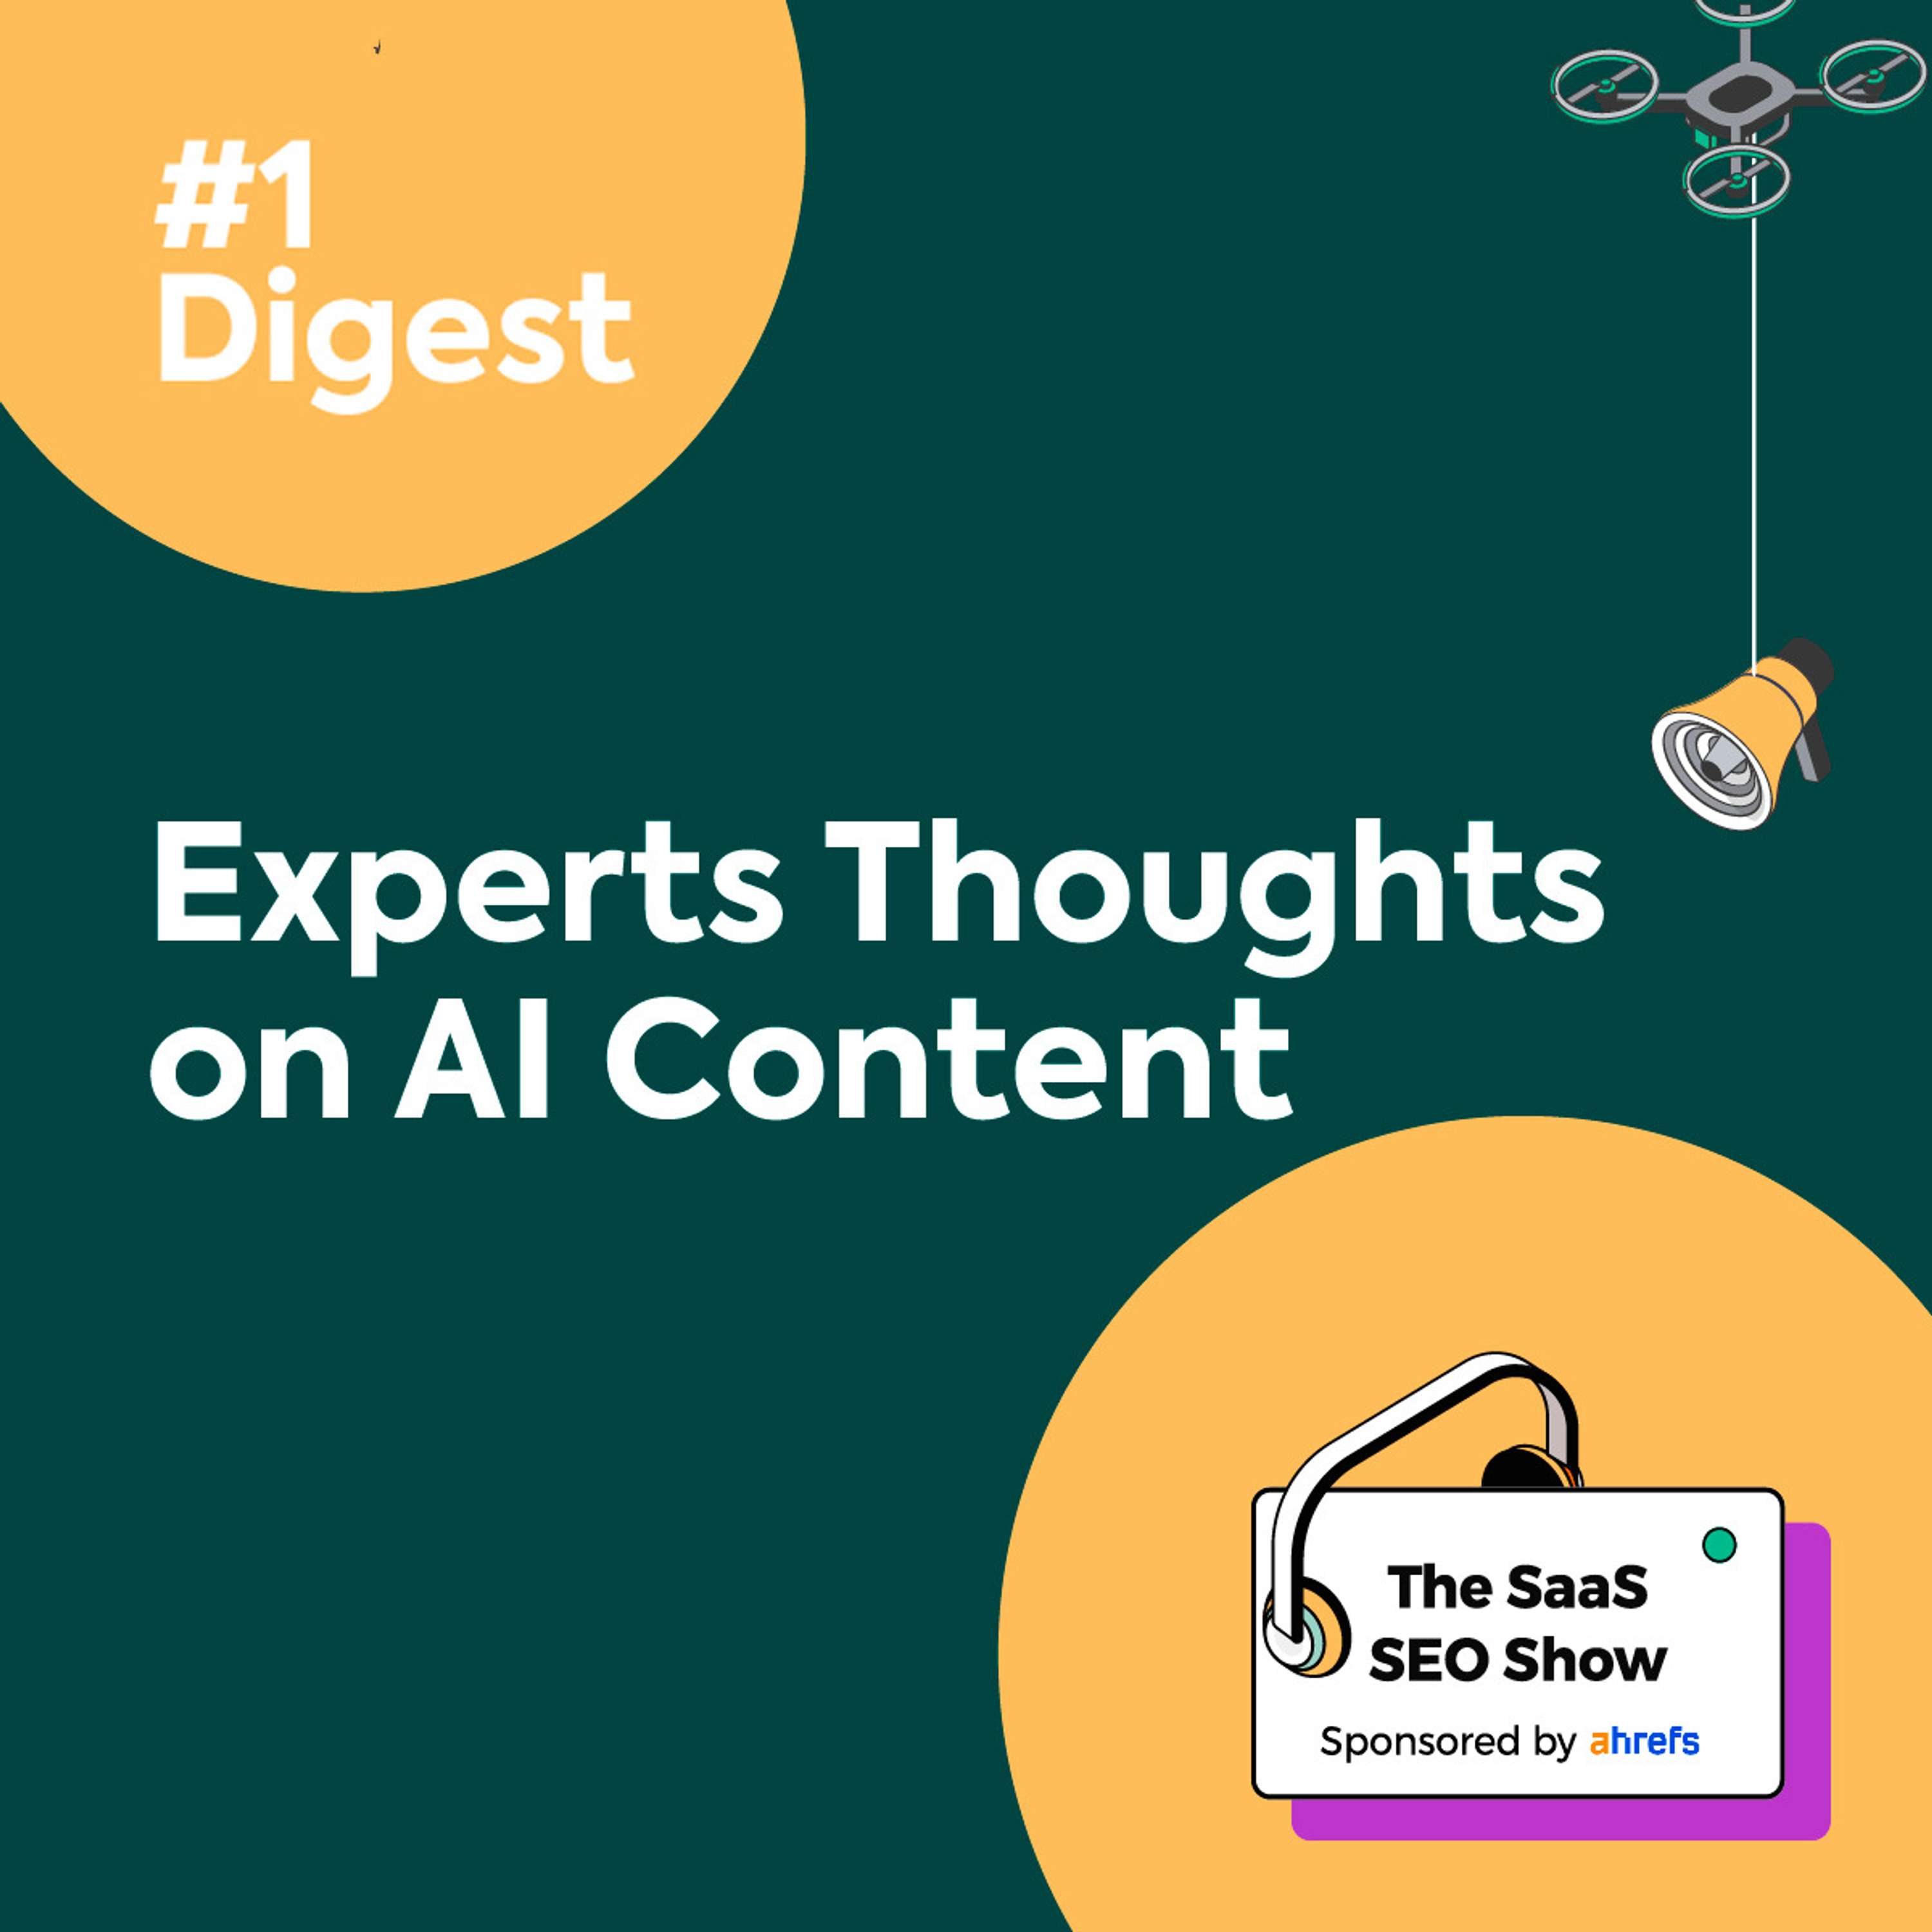 Expert Thoughts on AI Content #Digest